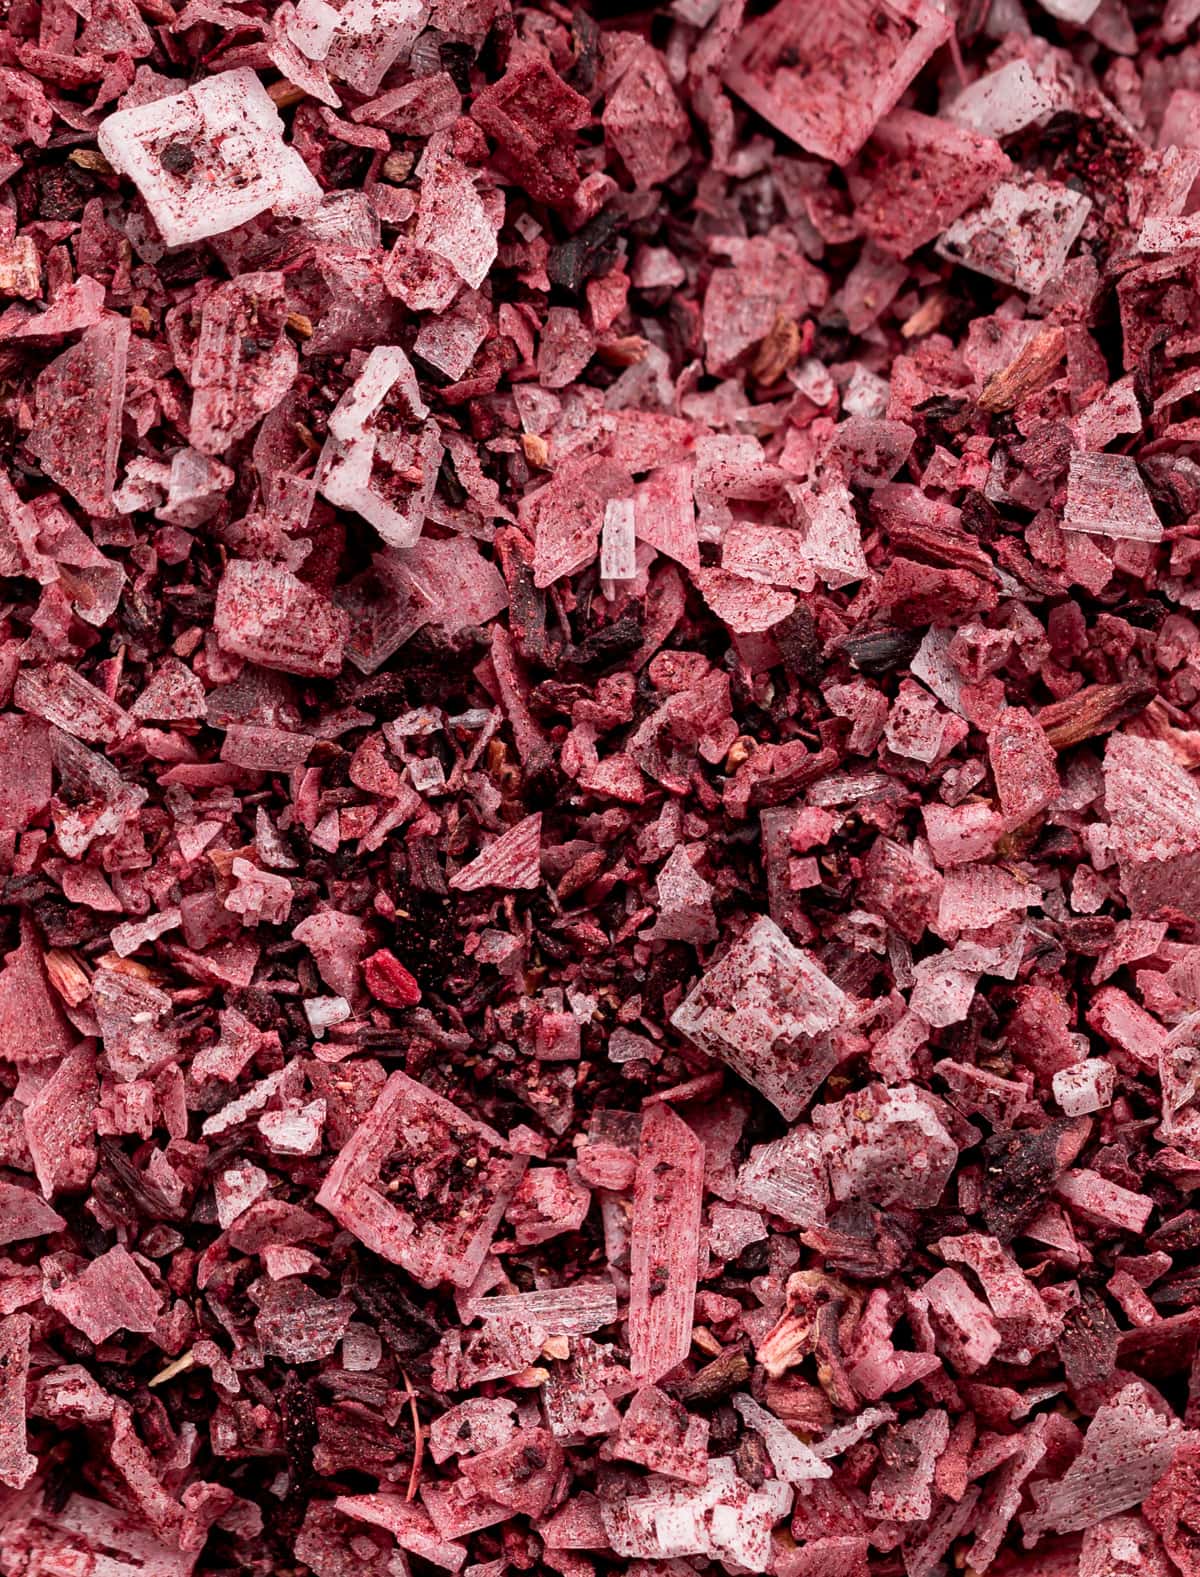 large maldon sea salt flakes mixed with powdered red hibiscus flowers